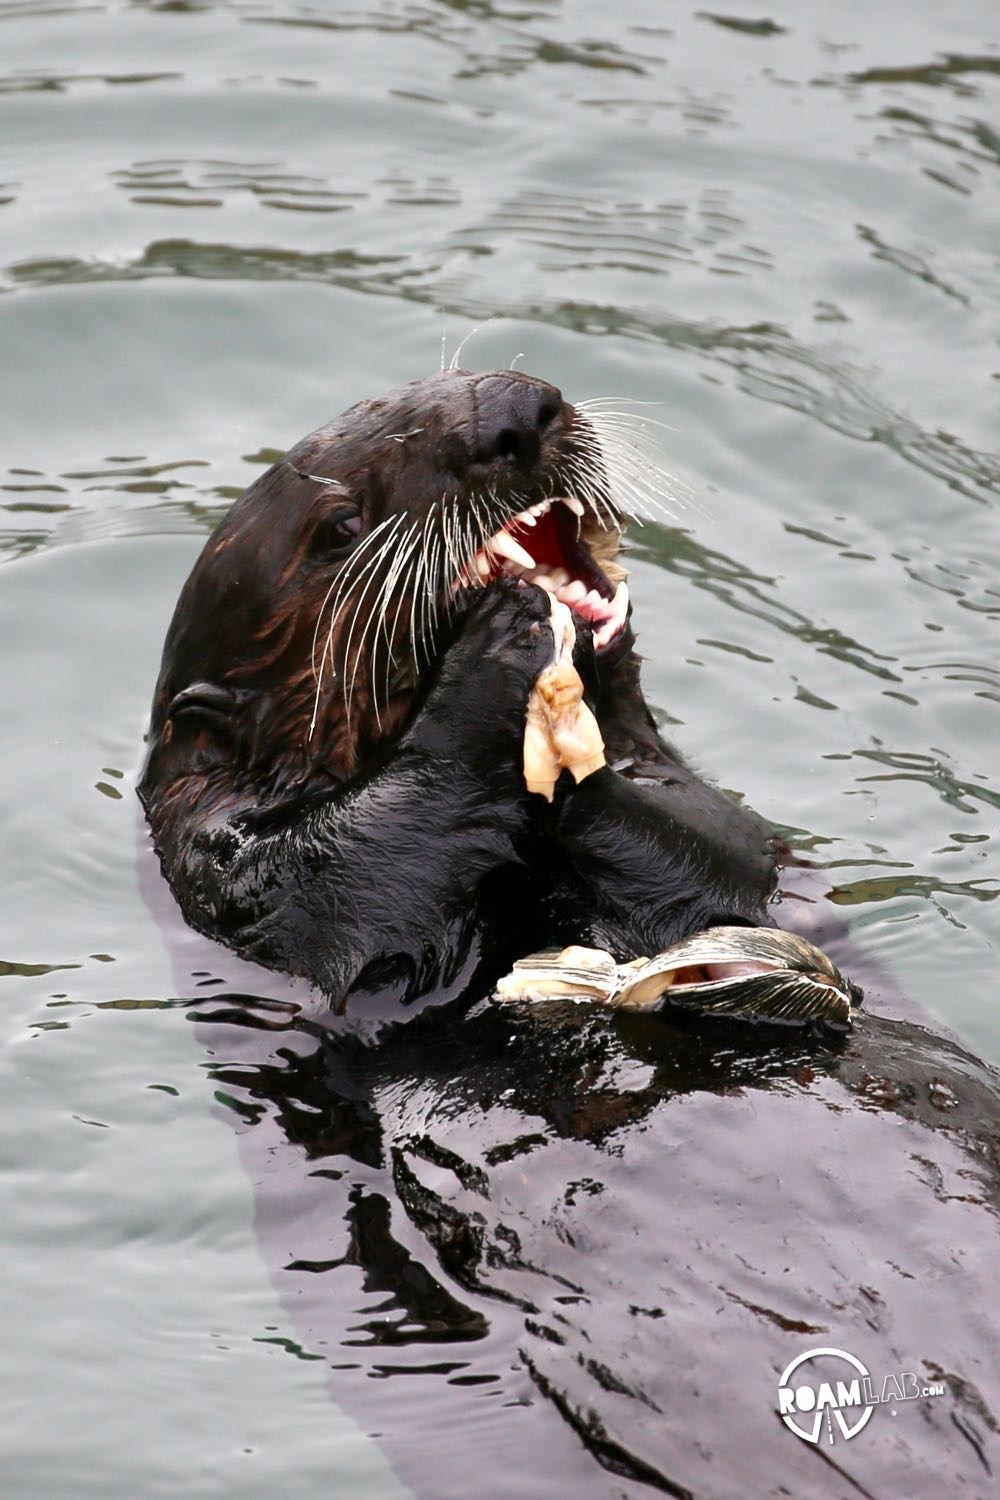 Sea otter chomping down on a gigantic clam in Morro Bay, California